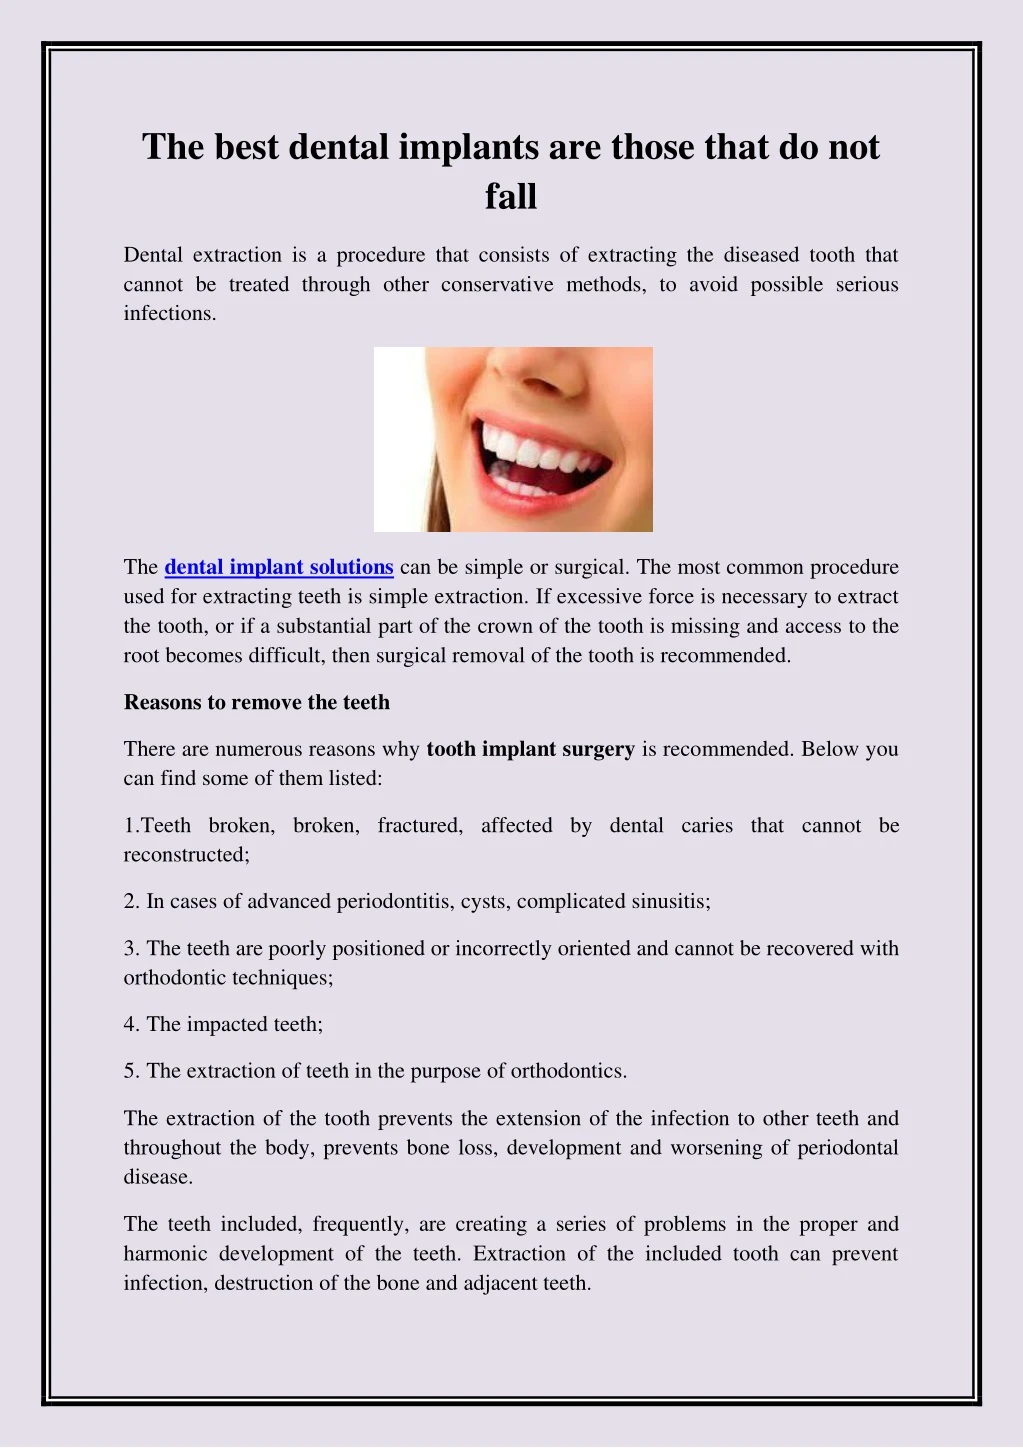 the best dental implants are those that